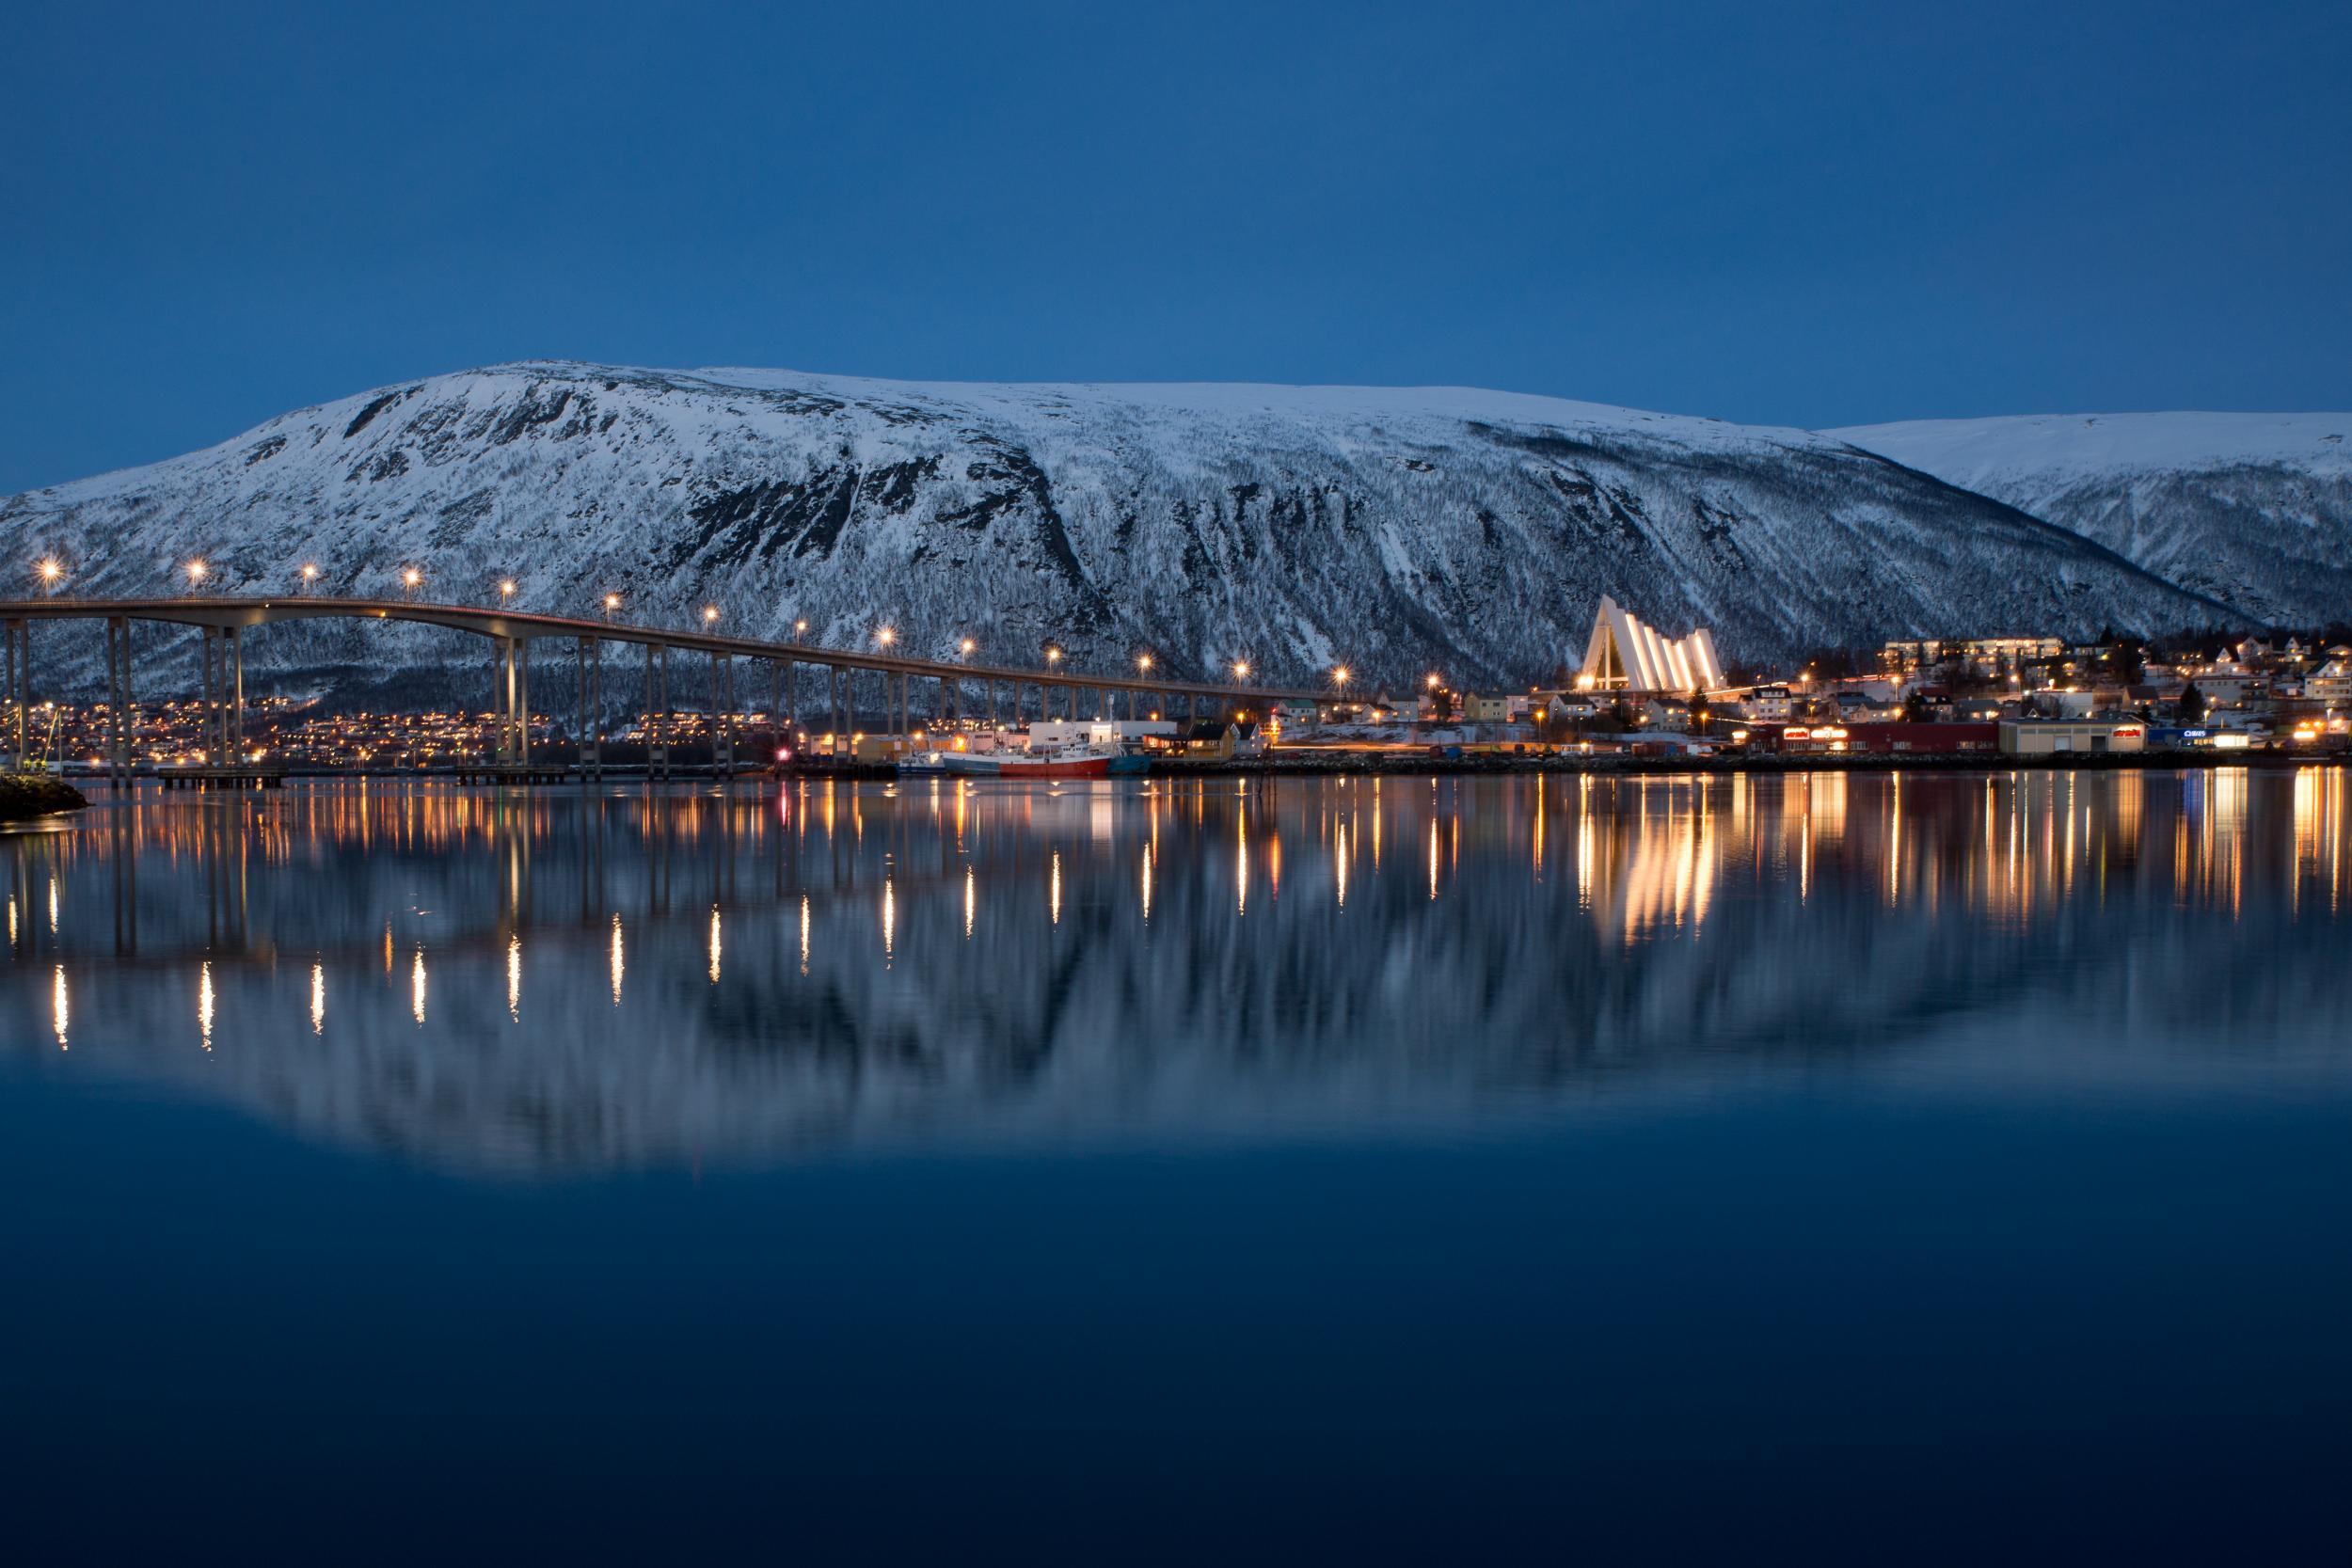 There's plenty to do in Tromso, even after you've spotted the aurora